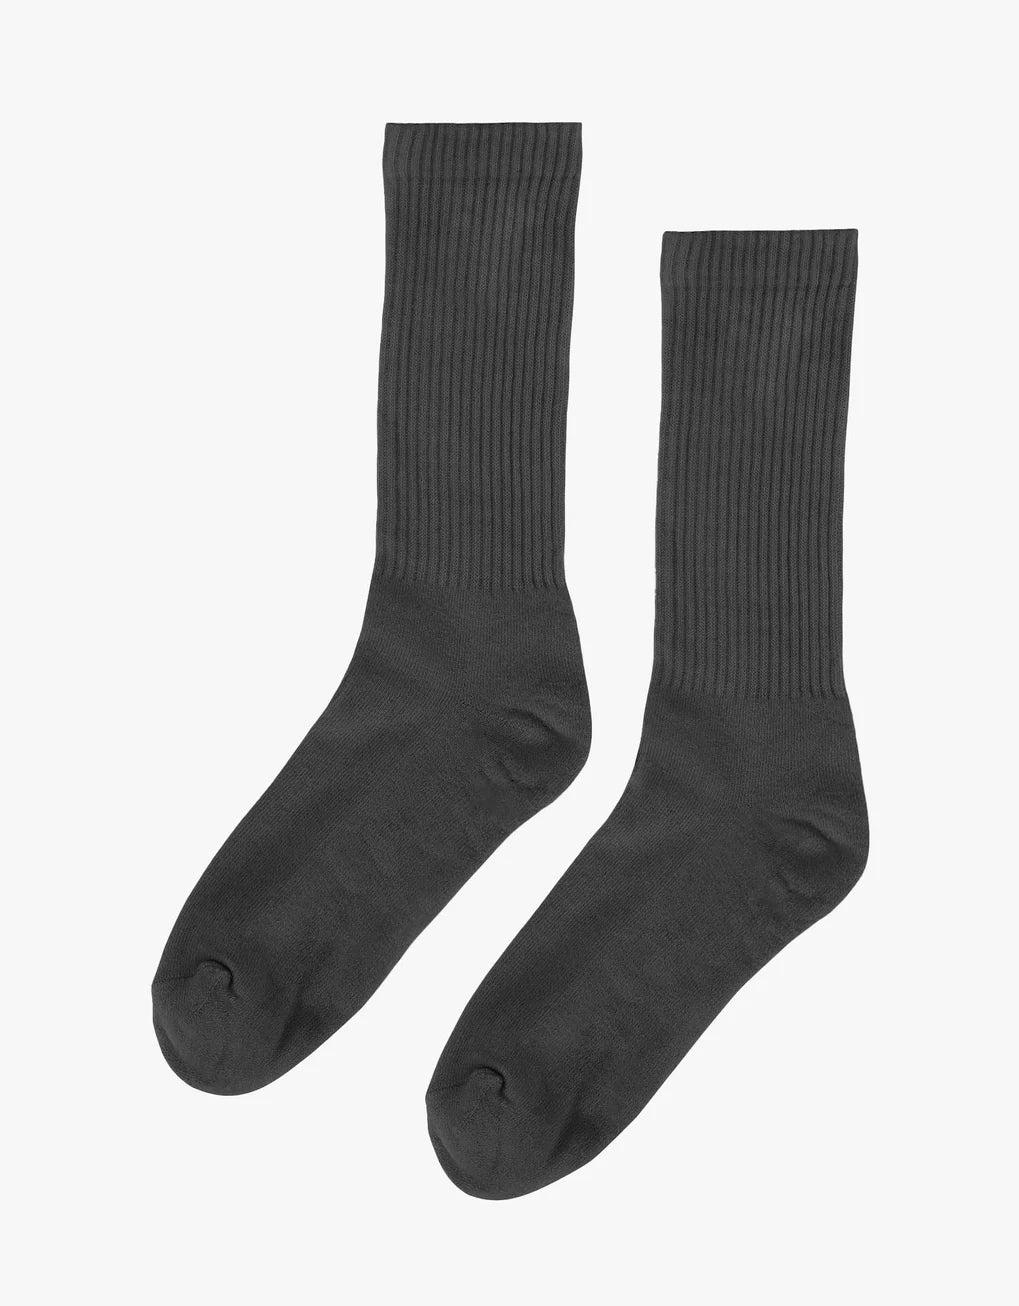 A pair of black Colorful Standard Organic Active Socks on a white background.